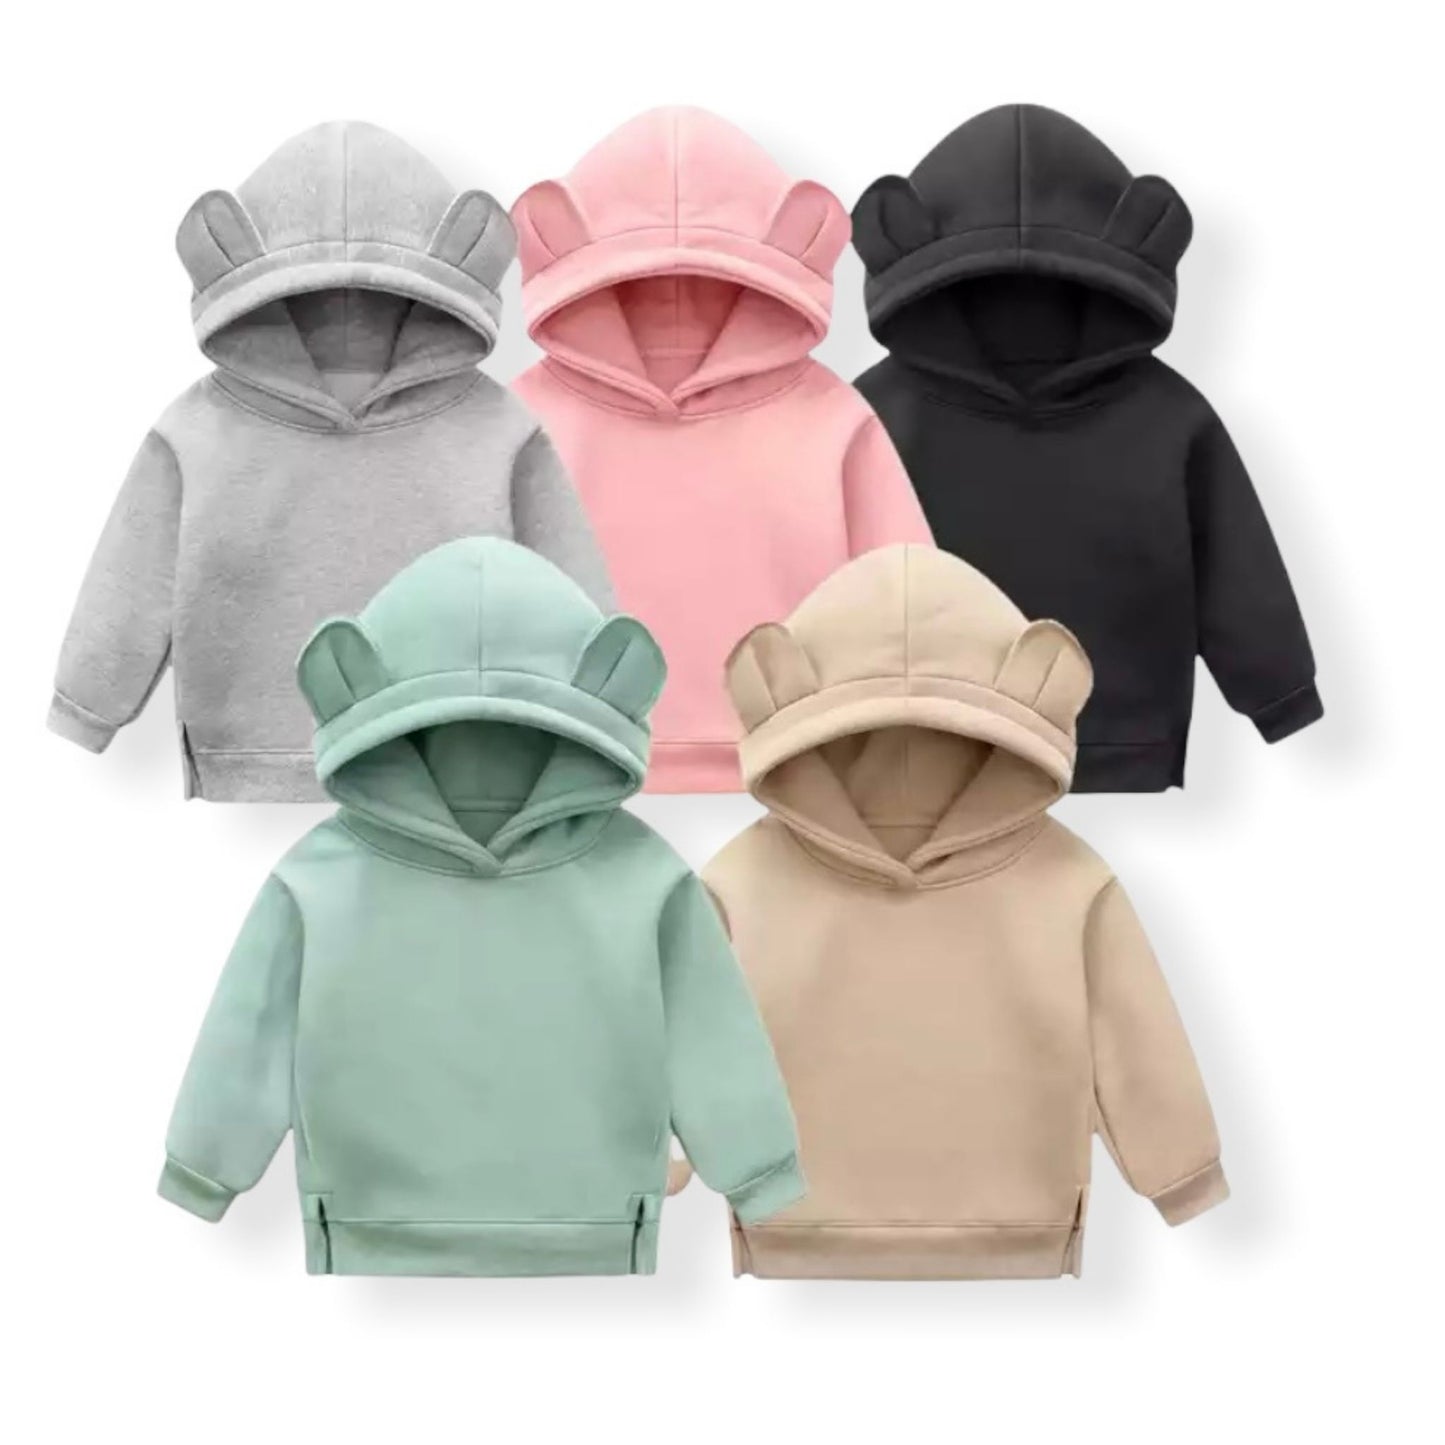 kids hoodies with ears for autumn and winter - hunny bubba kids